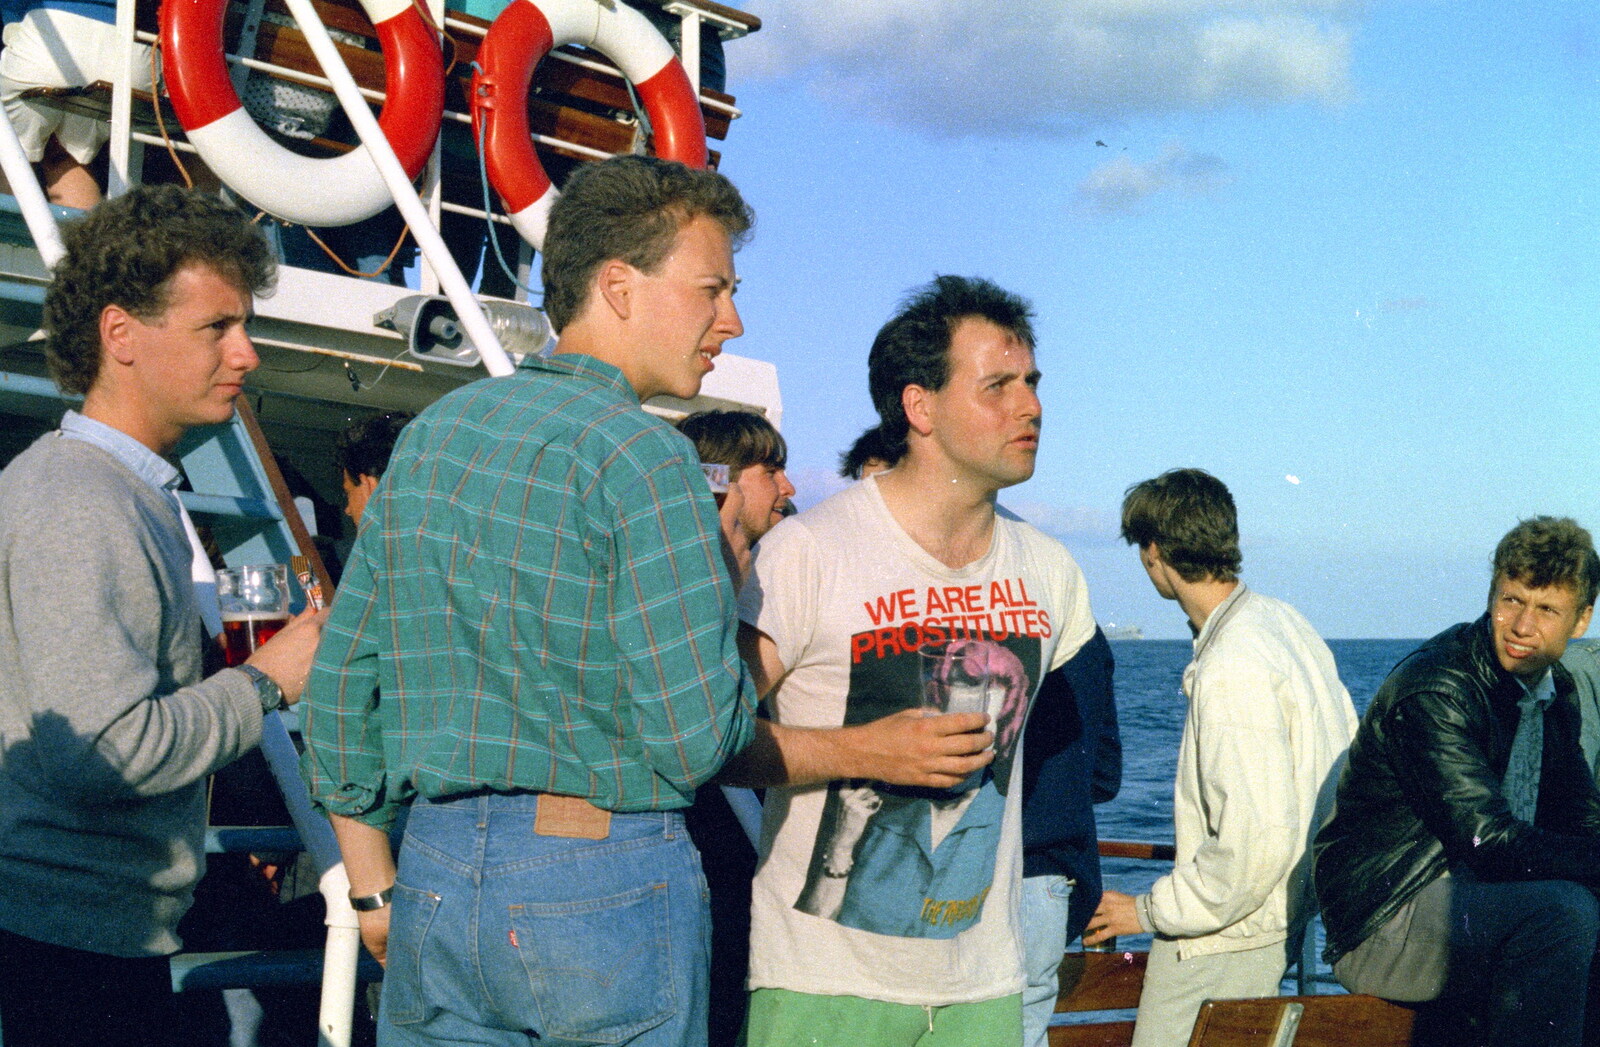 Ian Dunwoody with his favourite t-shirt from Uni: A Student Booze Cruise, Plymouth Sound, Devon - 2nd May 1986